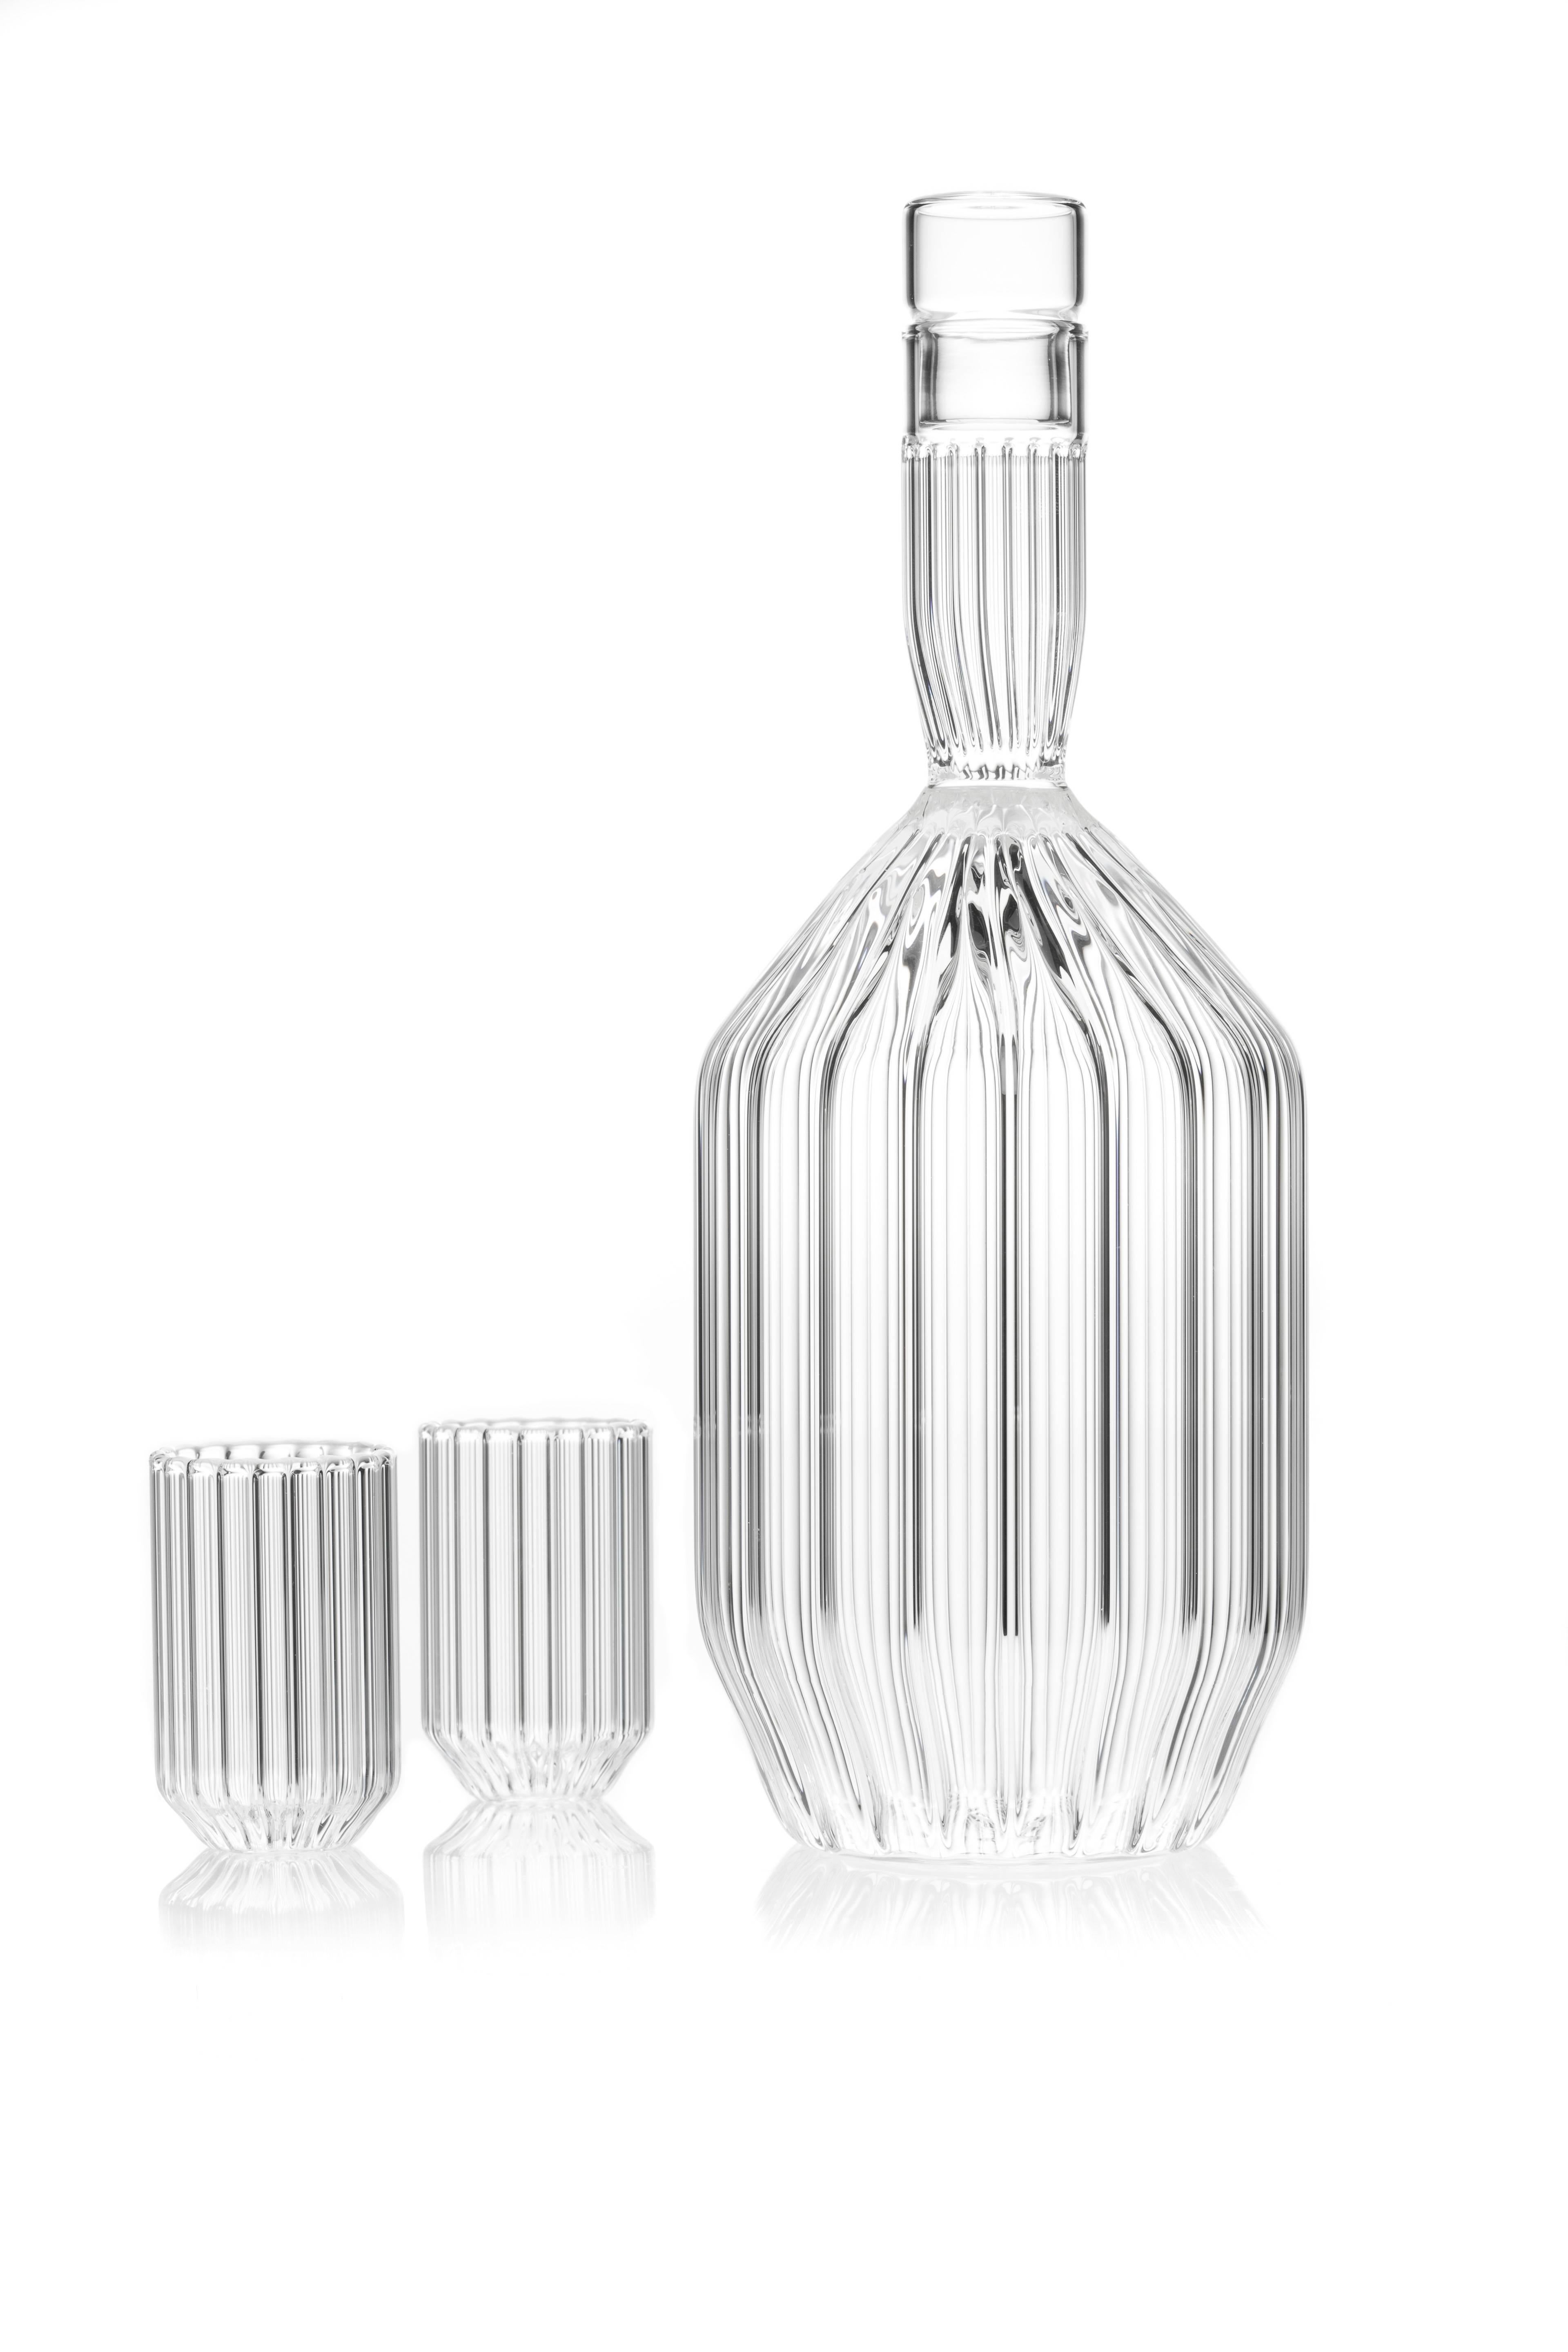 Entirely hand-formed without the use of molds, the Margot Decanter is an ideal companion to any evening spent enjoying your favorite port, scotch, bourbon, or other liqueur. With its timeless elegance the decanter promises to be a winsome addition